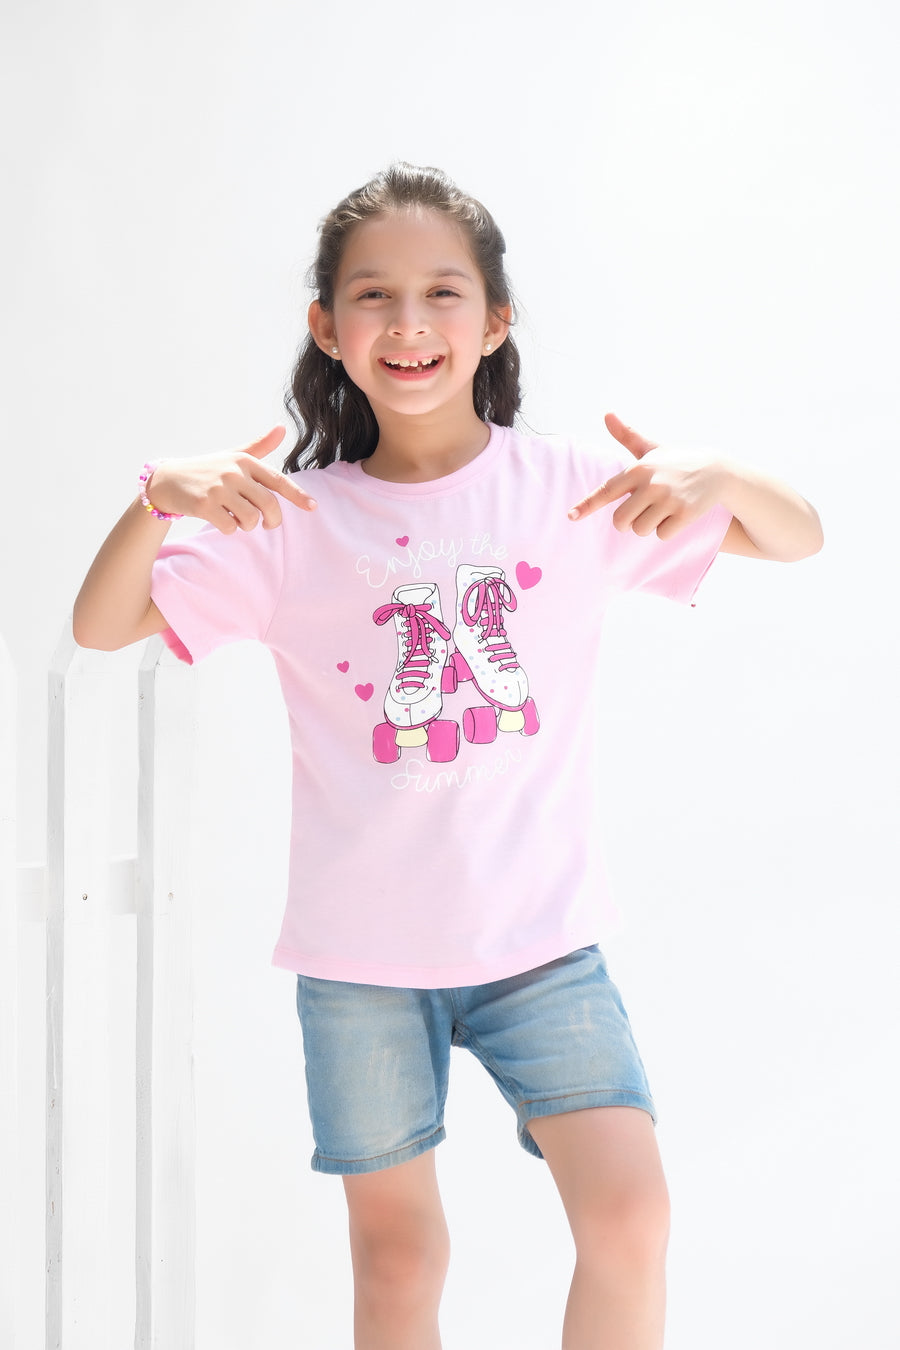 Enjoy The Summer Half Sleeves T-shirts For Kids - Pink